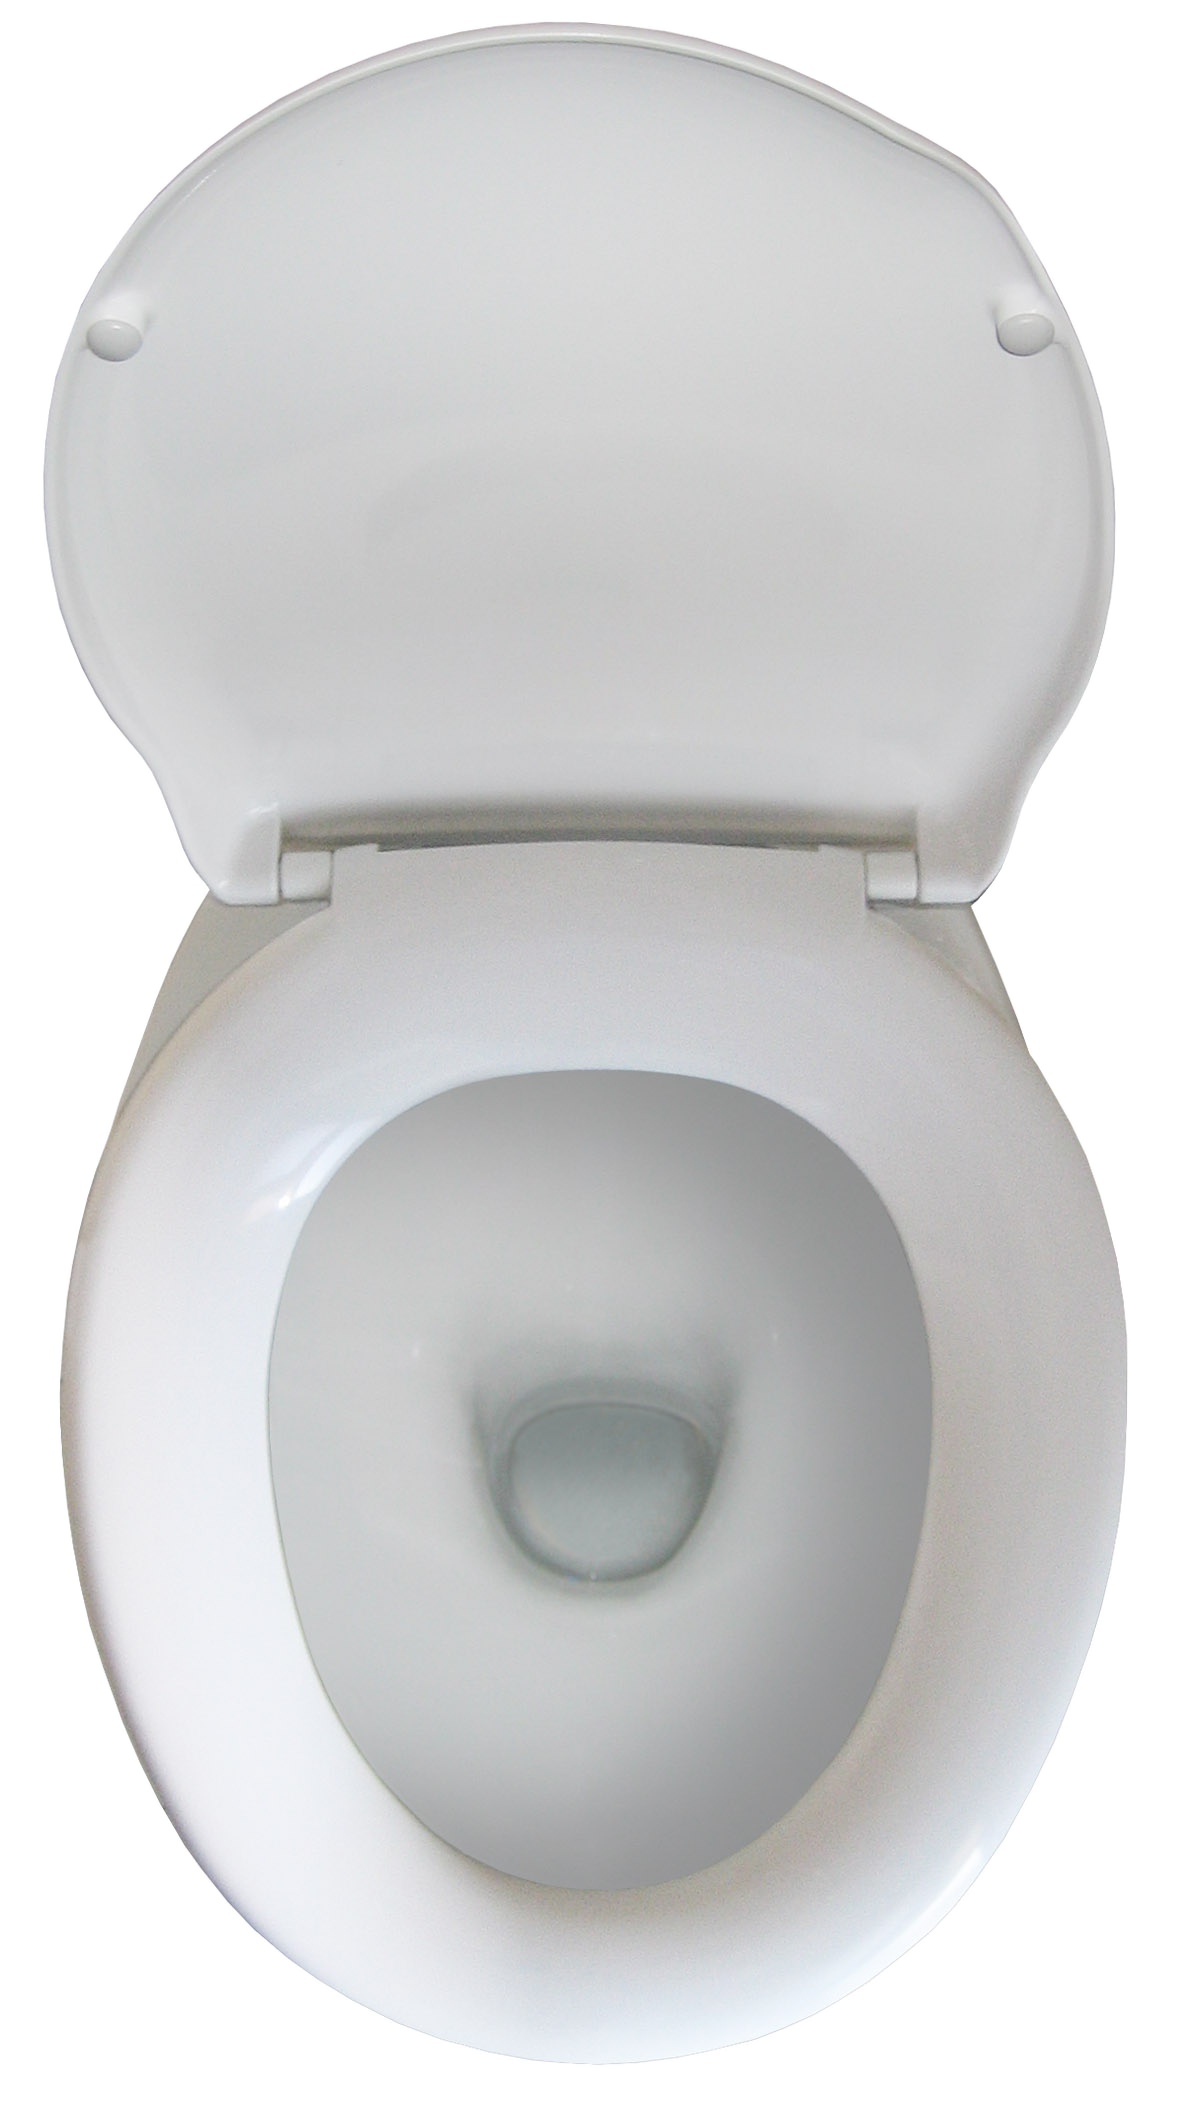 Toilet PNG images free download
